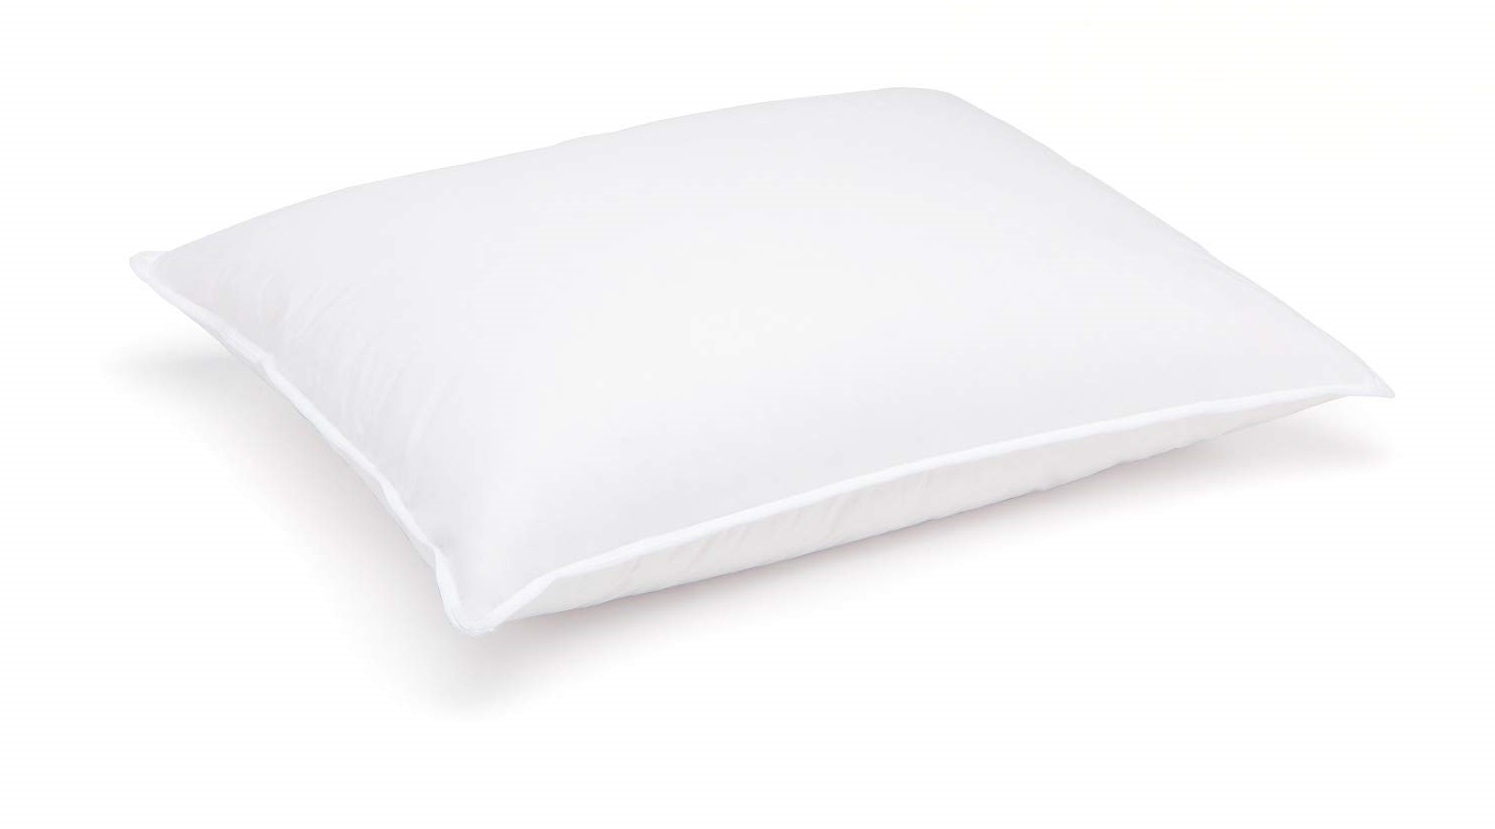 a Chamber pillow from Downlite